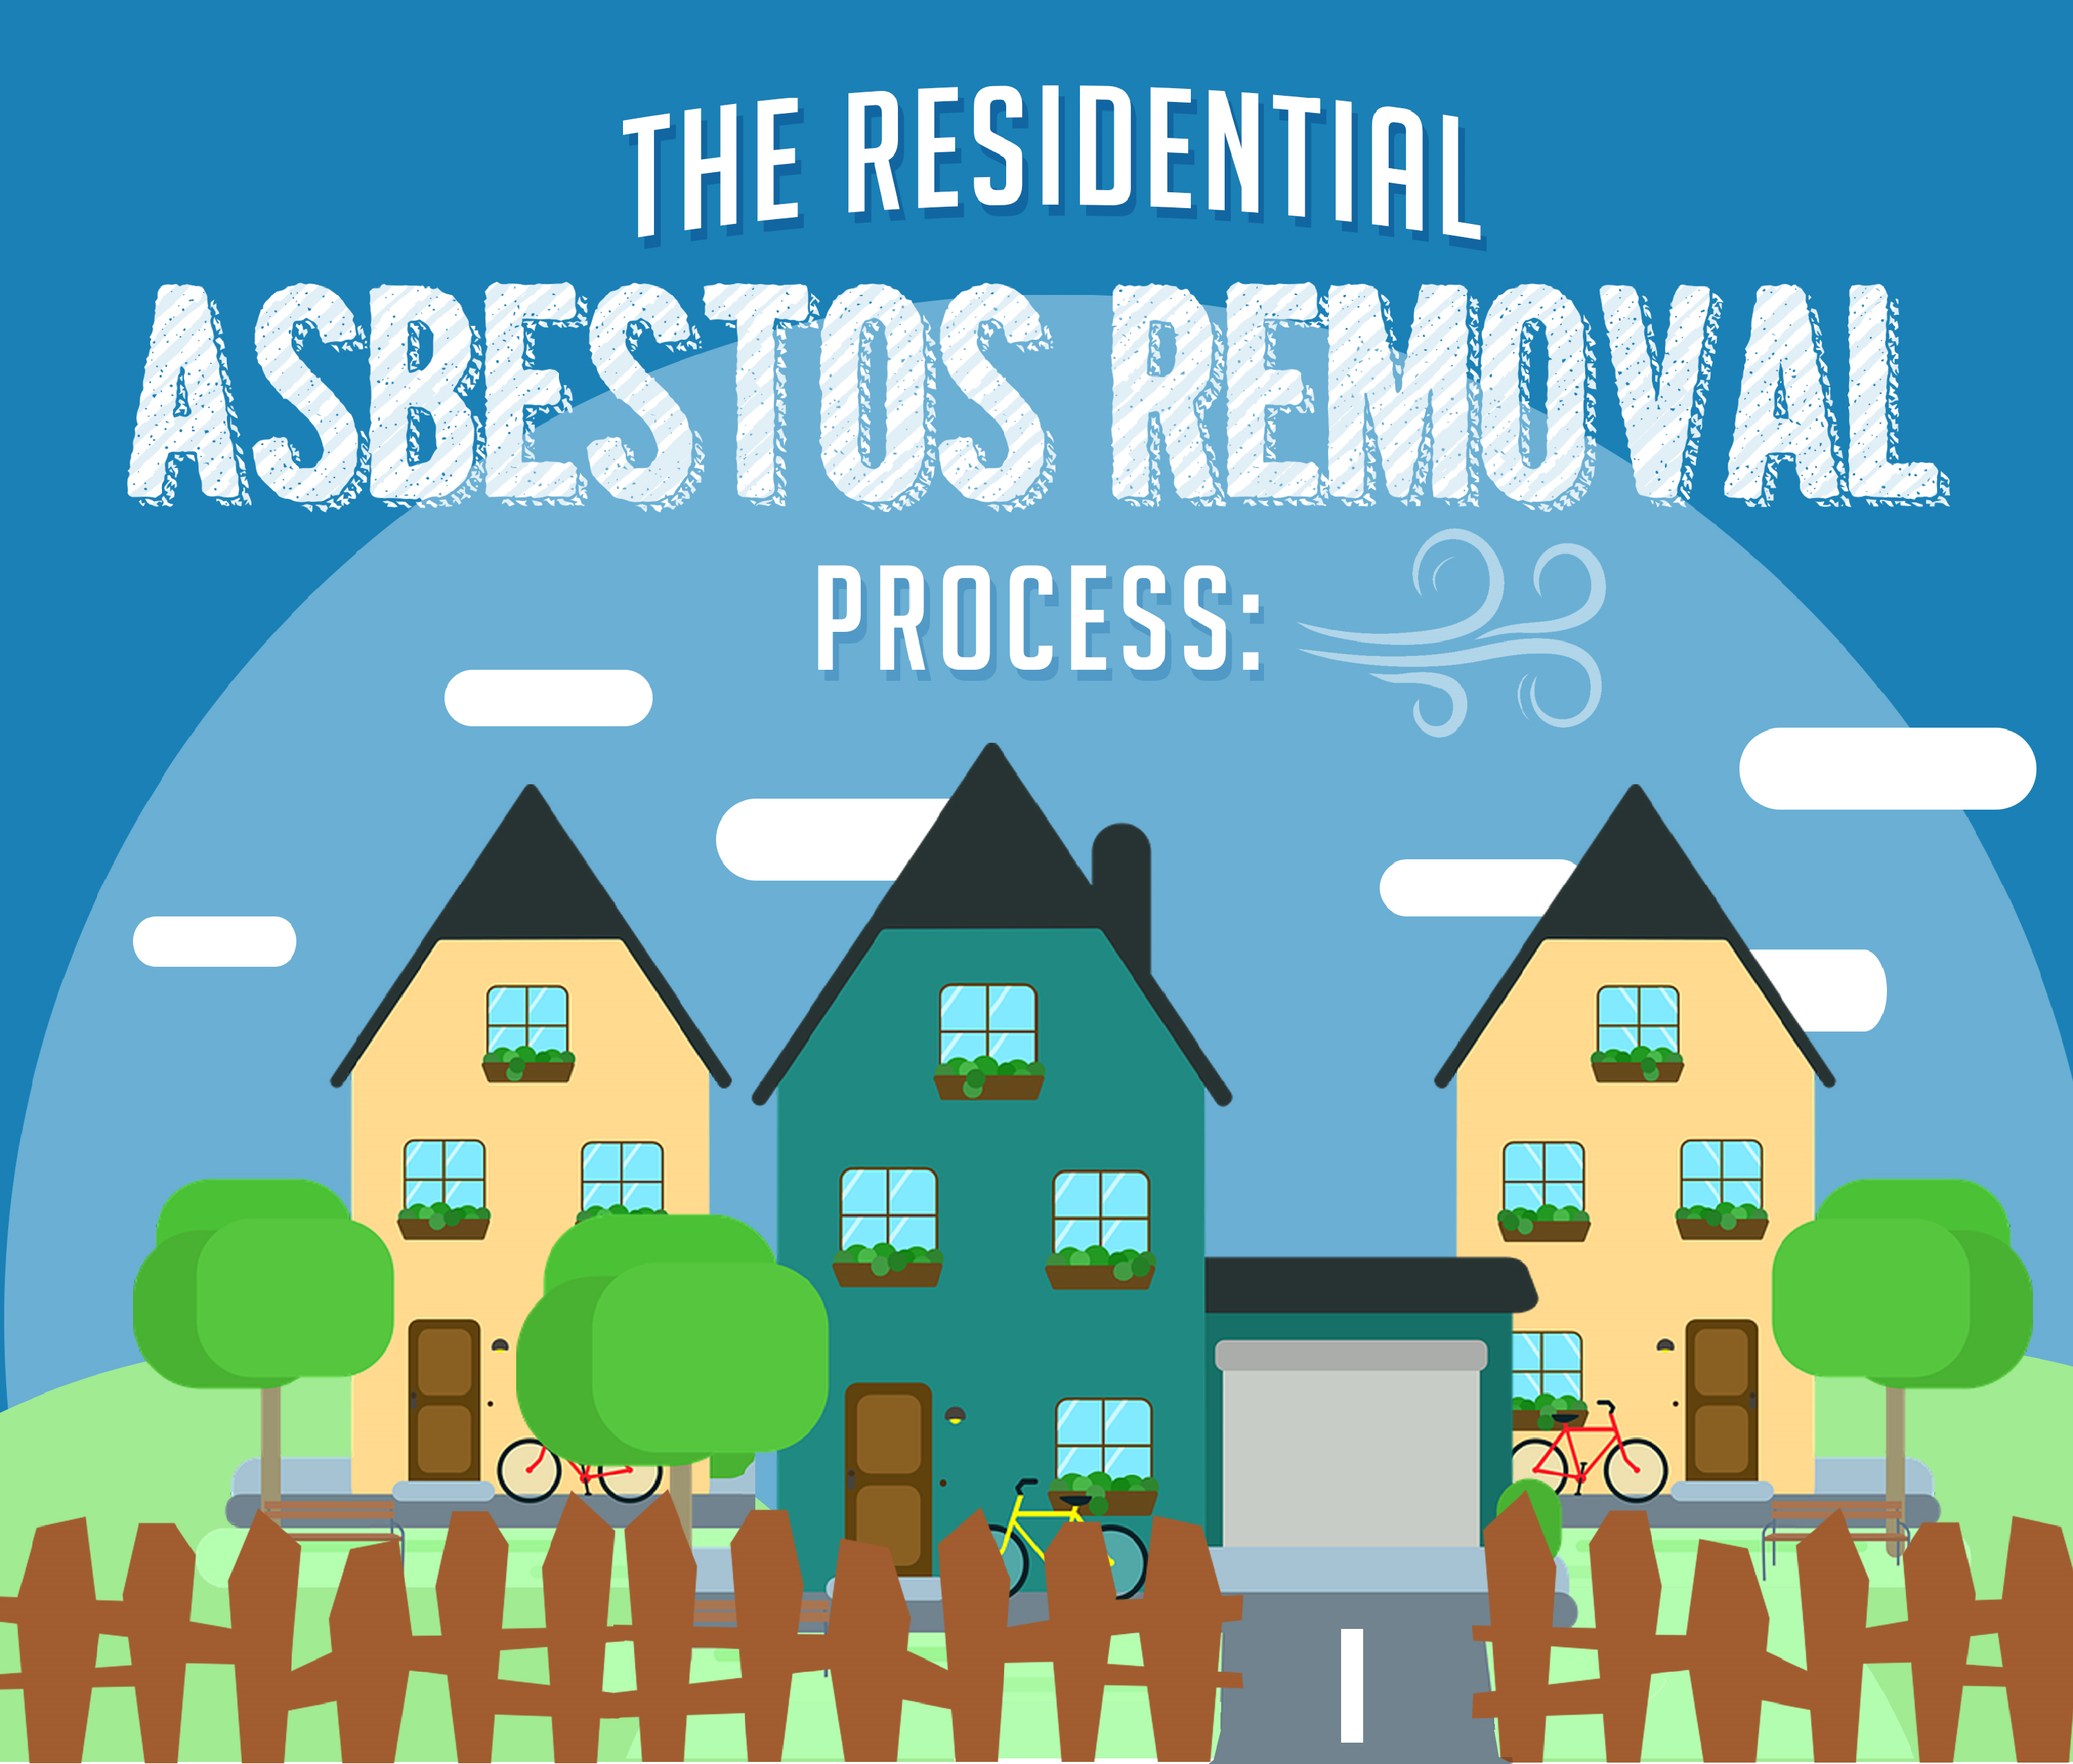 The Residential Asbestos Removal Process: An Infographic